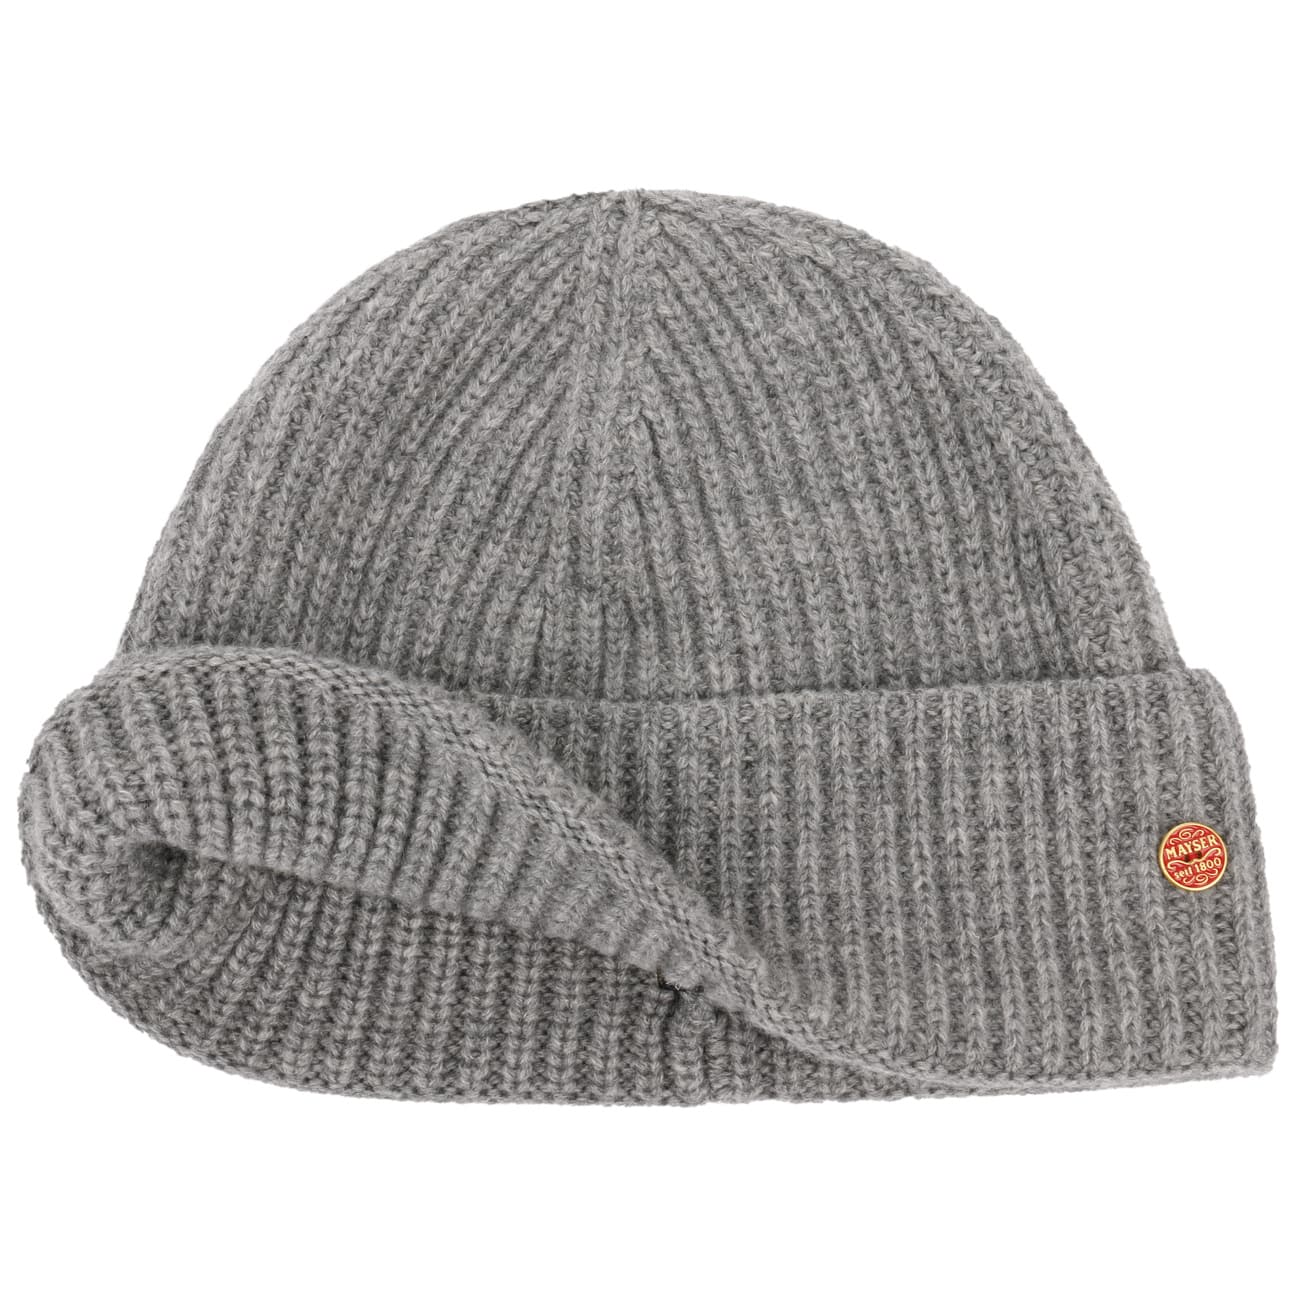 Surth Cashmere Knit Hat STETSON EUROPE, Fast Shipping